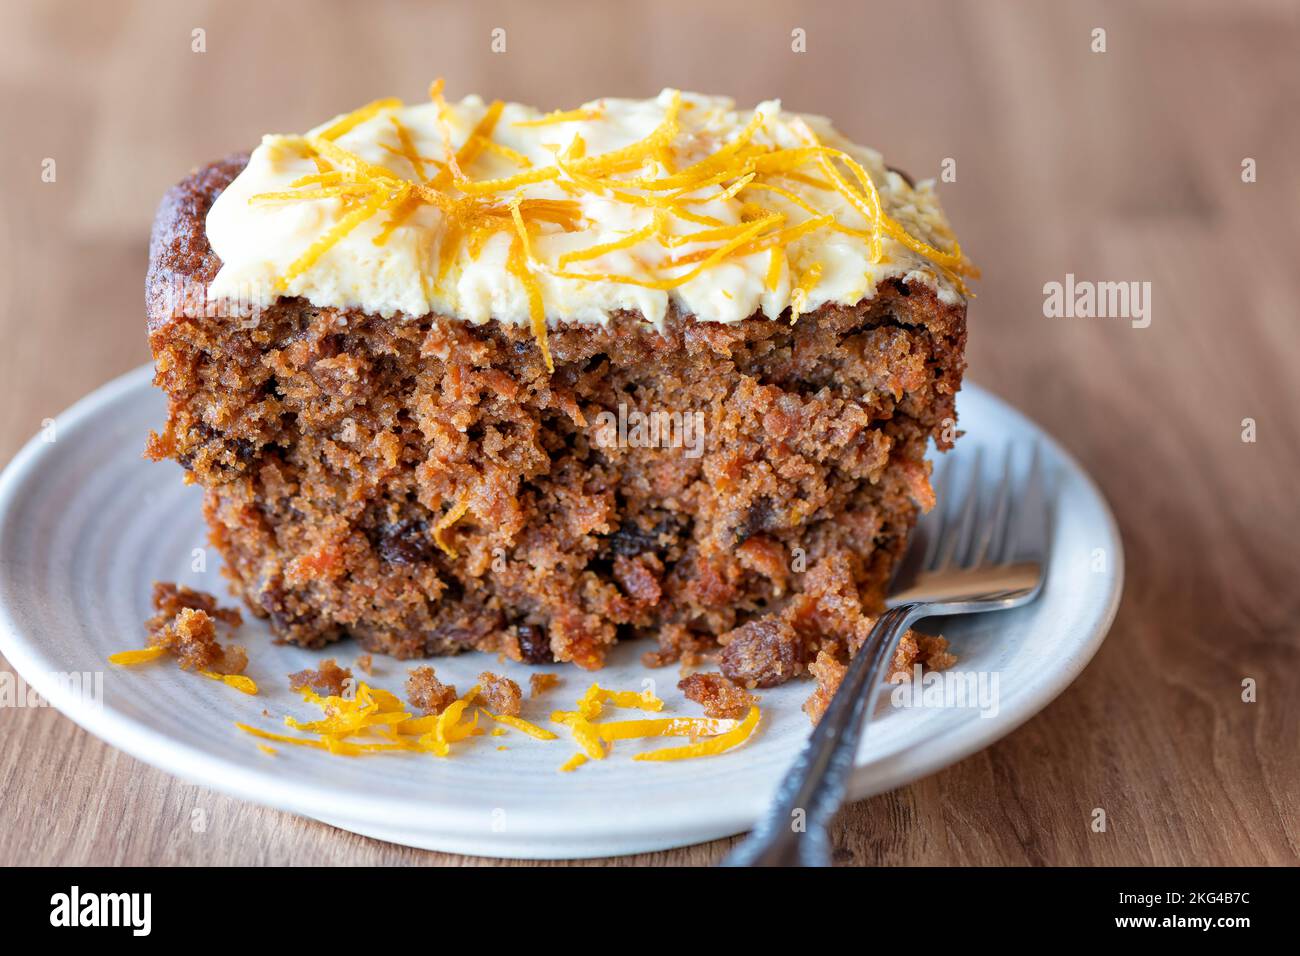 A home baked Carrot and Tamarind cake. The cake is made using a traditional recipe with the addition of tamarind. It has a cream cheese frosting Stock Photo